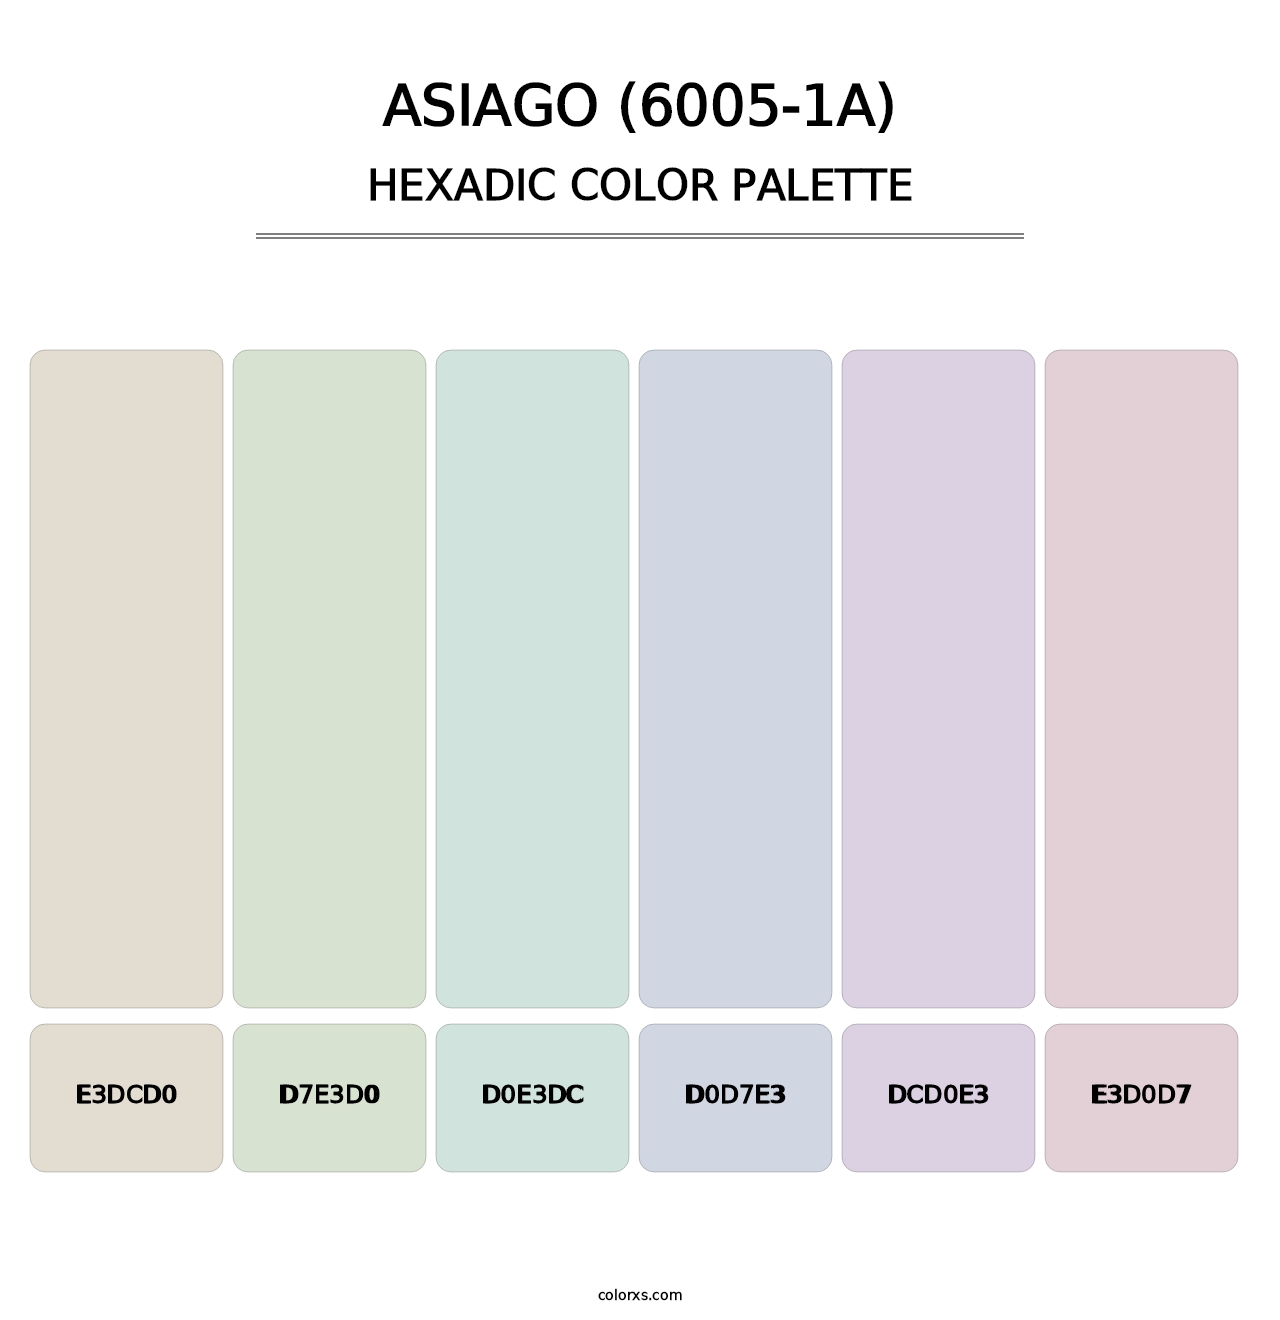 Asiago (6005-1A) - Hexadic Color Palette